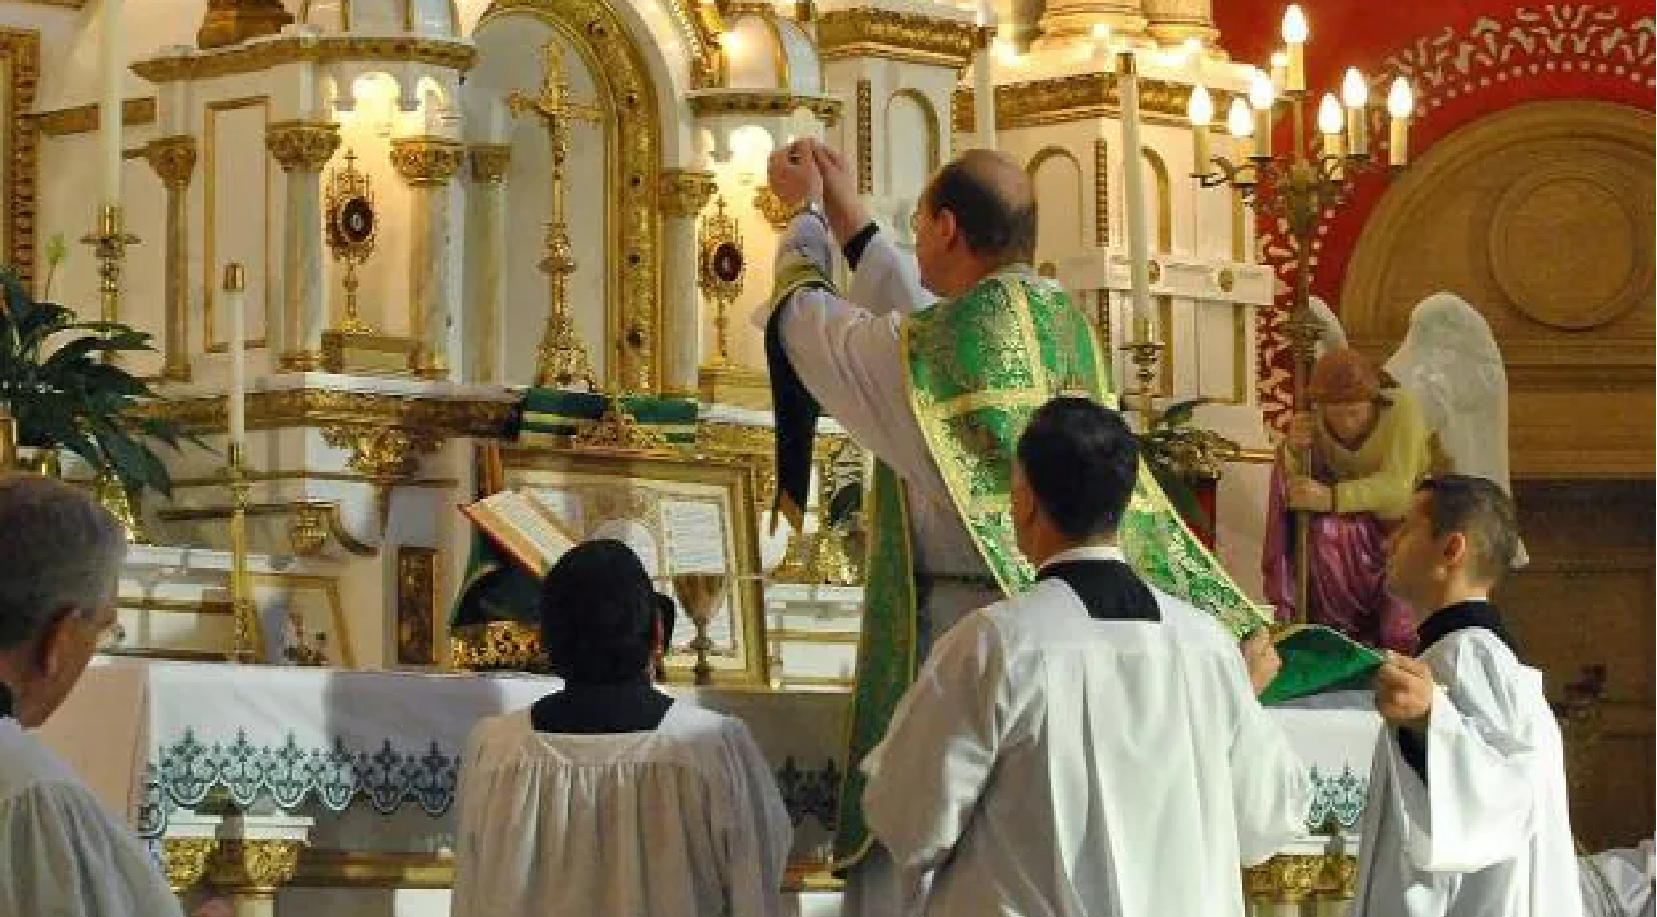 Recently rumors have been flying that Pope Francis is preparing to impose stringent restrictions on the Traditional Latin Mass